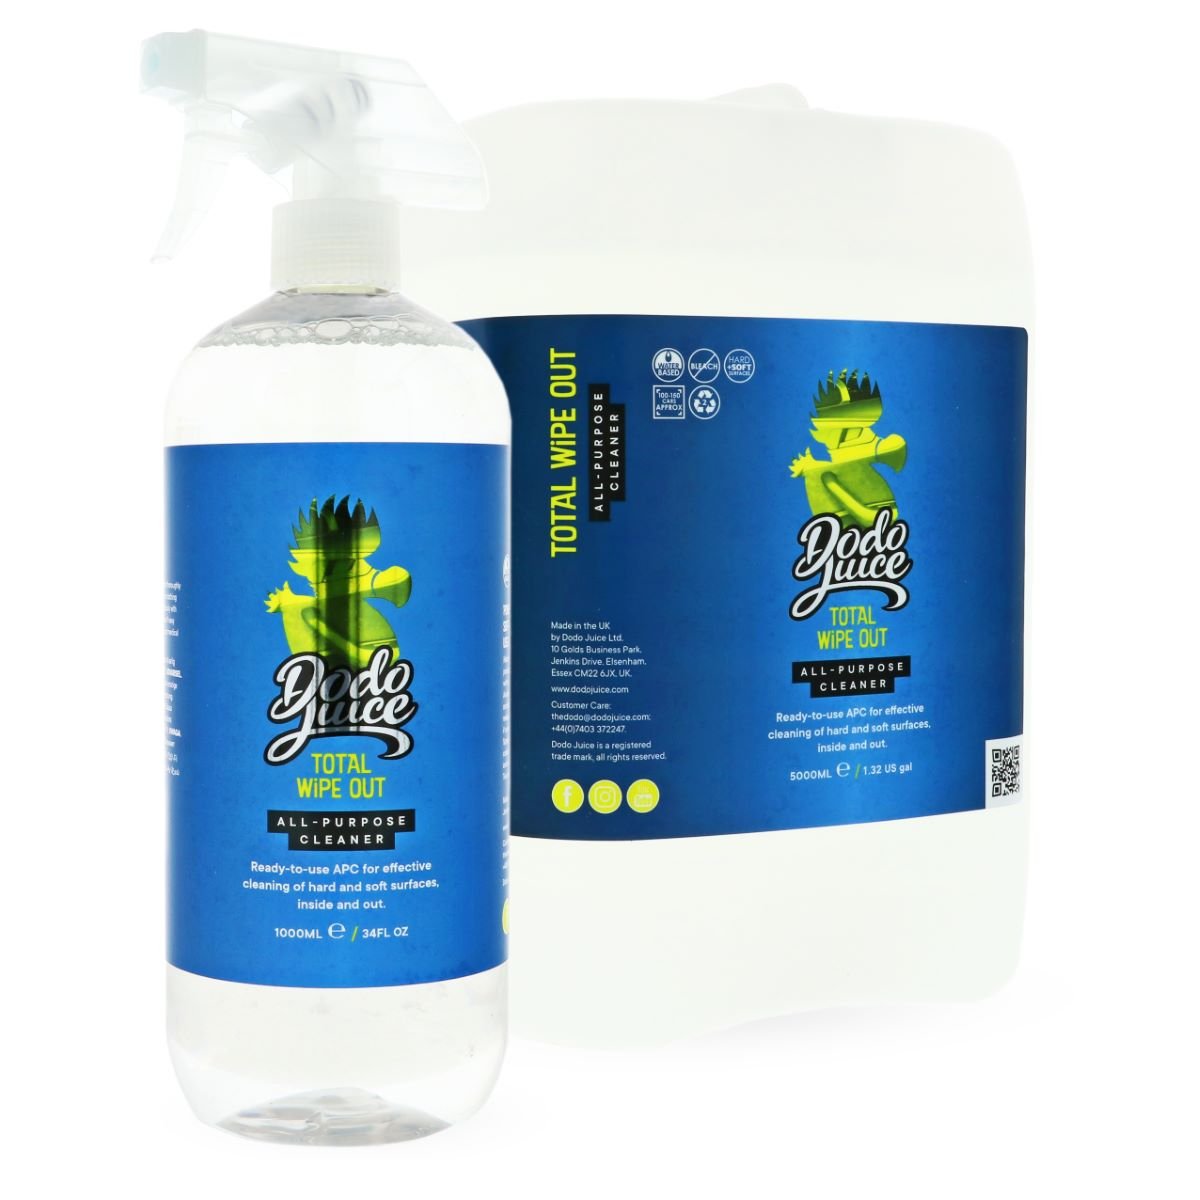 Total Wipe Out All-Purpose Cleaner